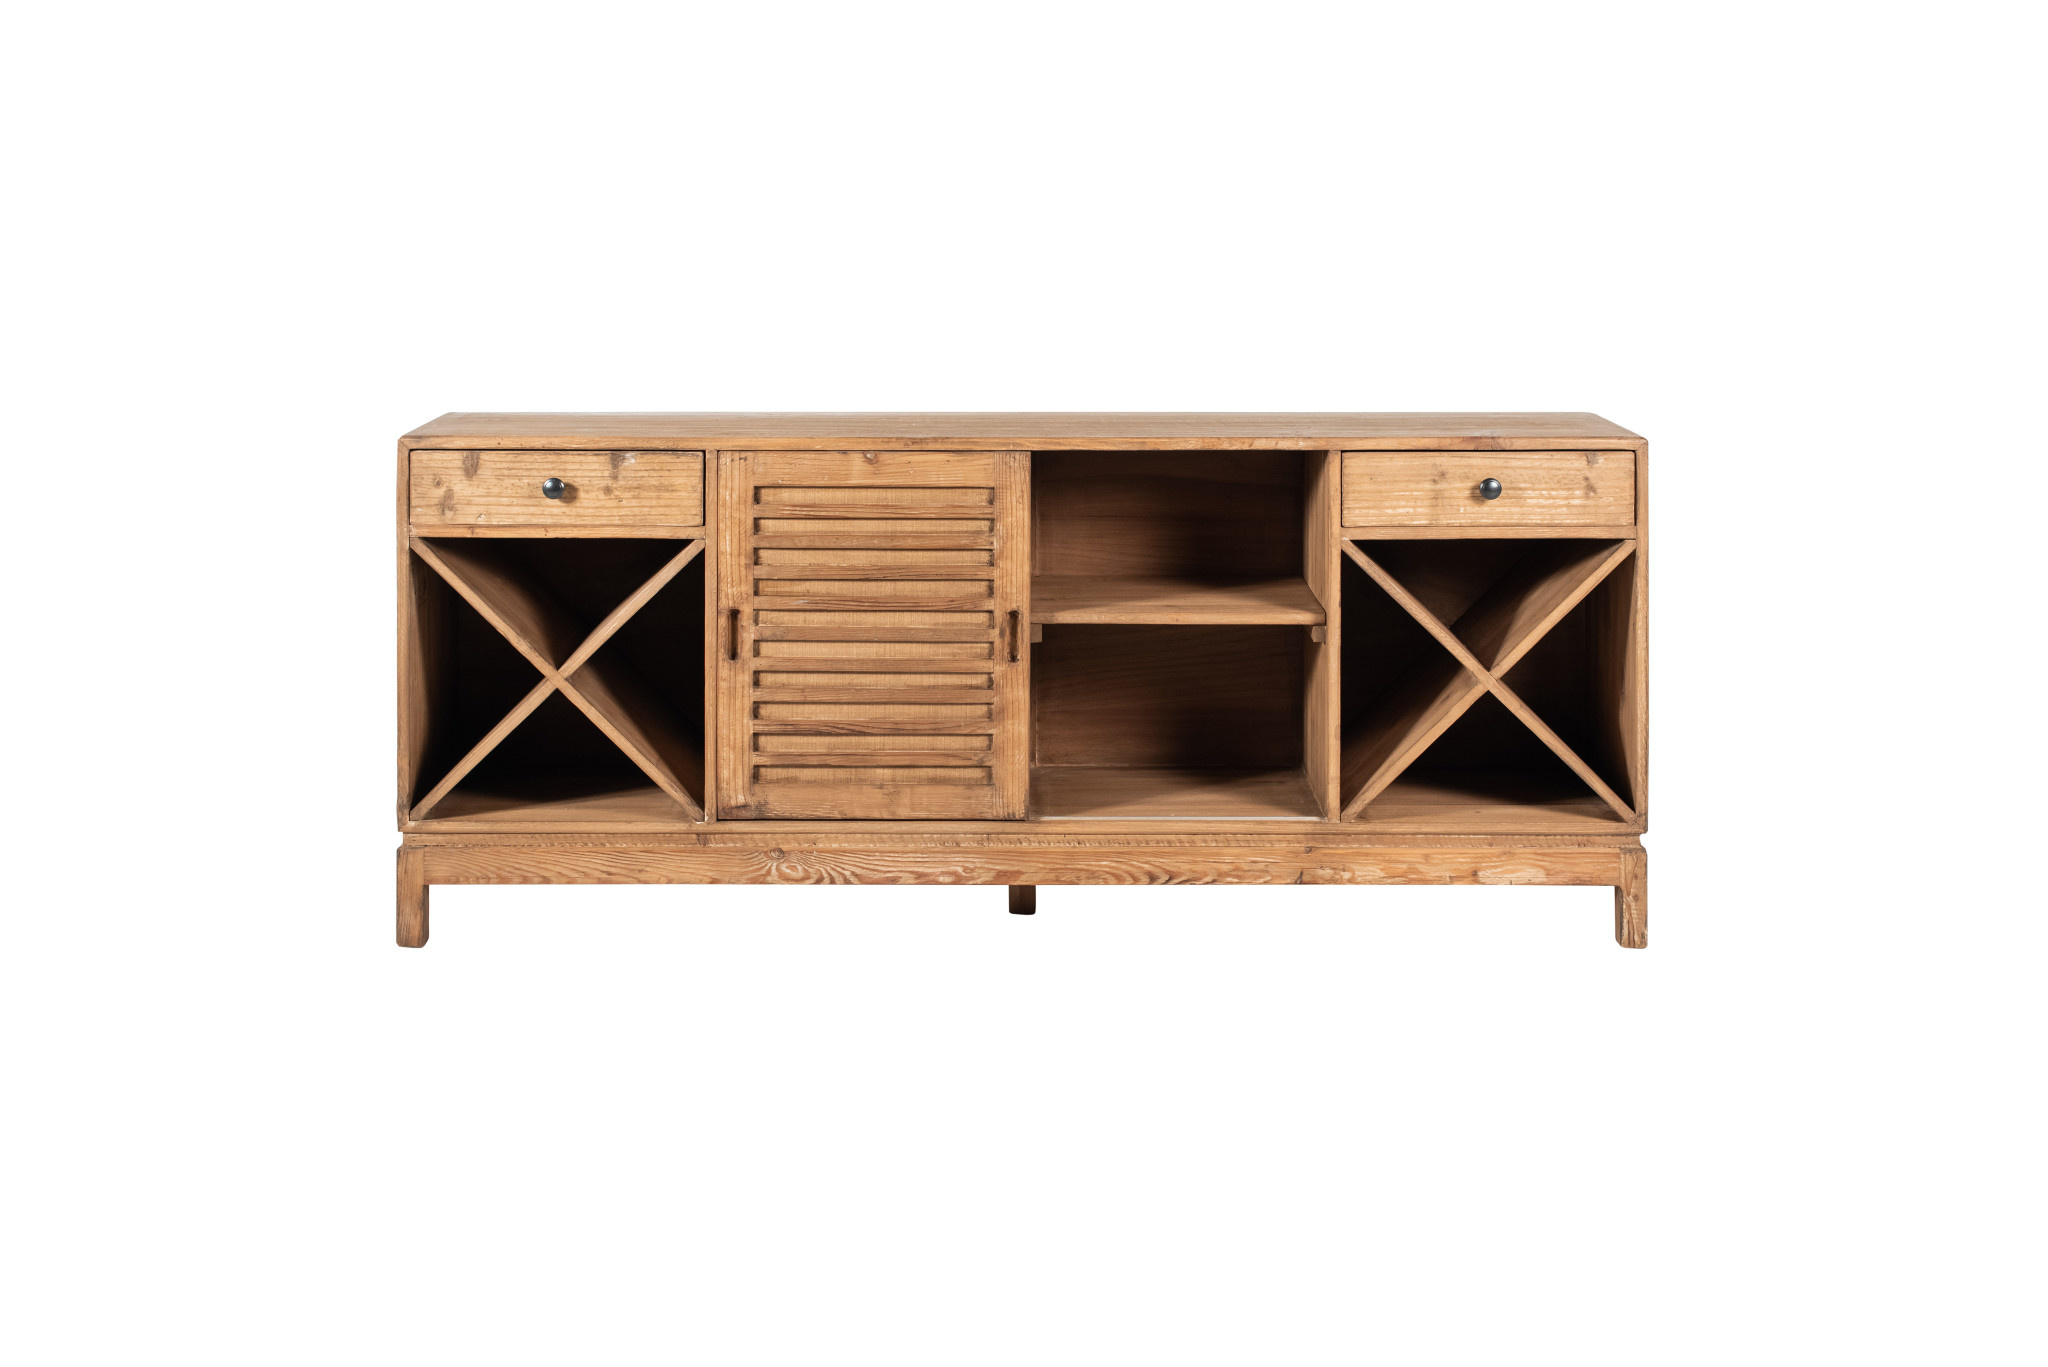 Philip Console, 77 x 17 x 32 Furniture Available for Local Delivery or Pick Up